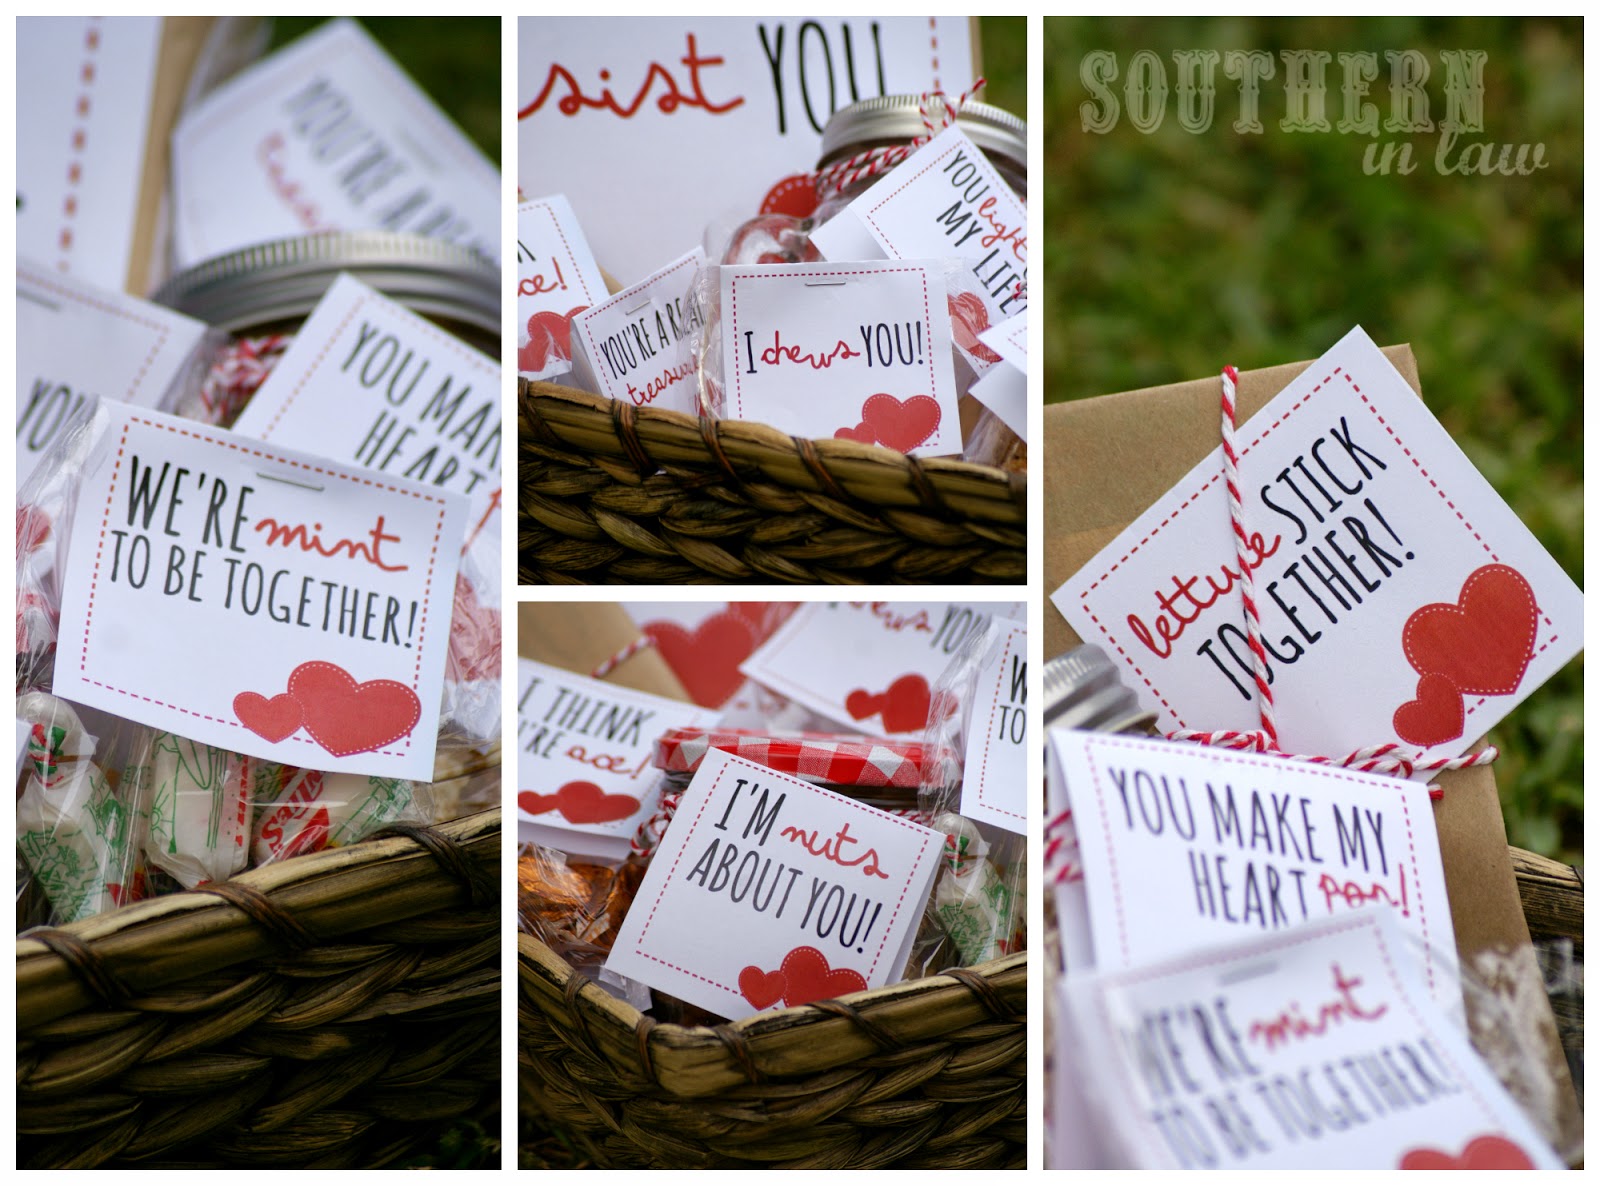 My Punny Valentine: 40+ Punny Valentines Gift Ideas with FREE Printable Gift Tags!